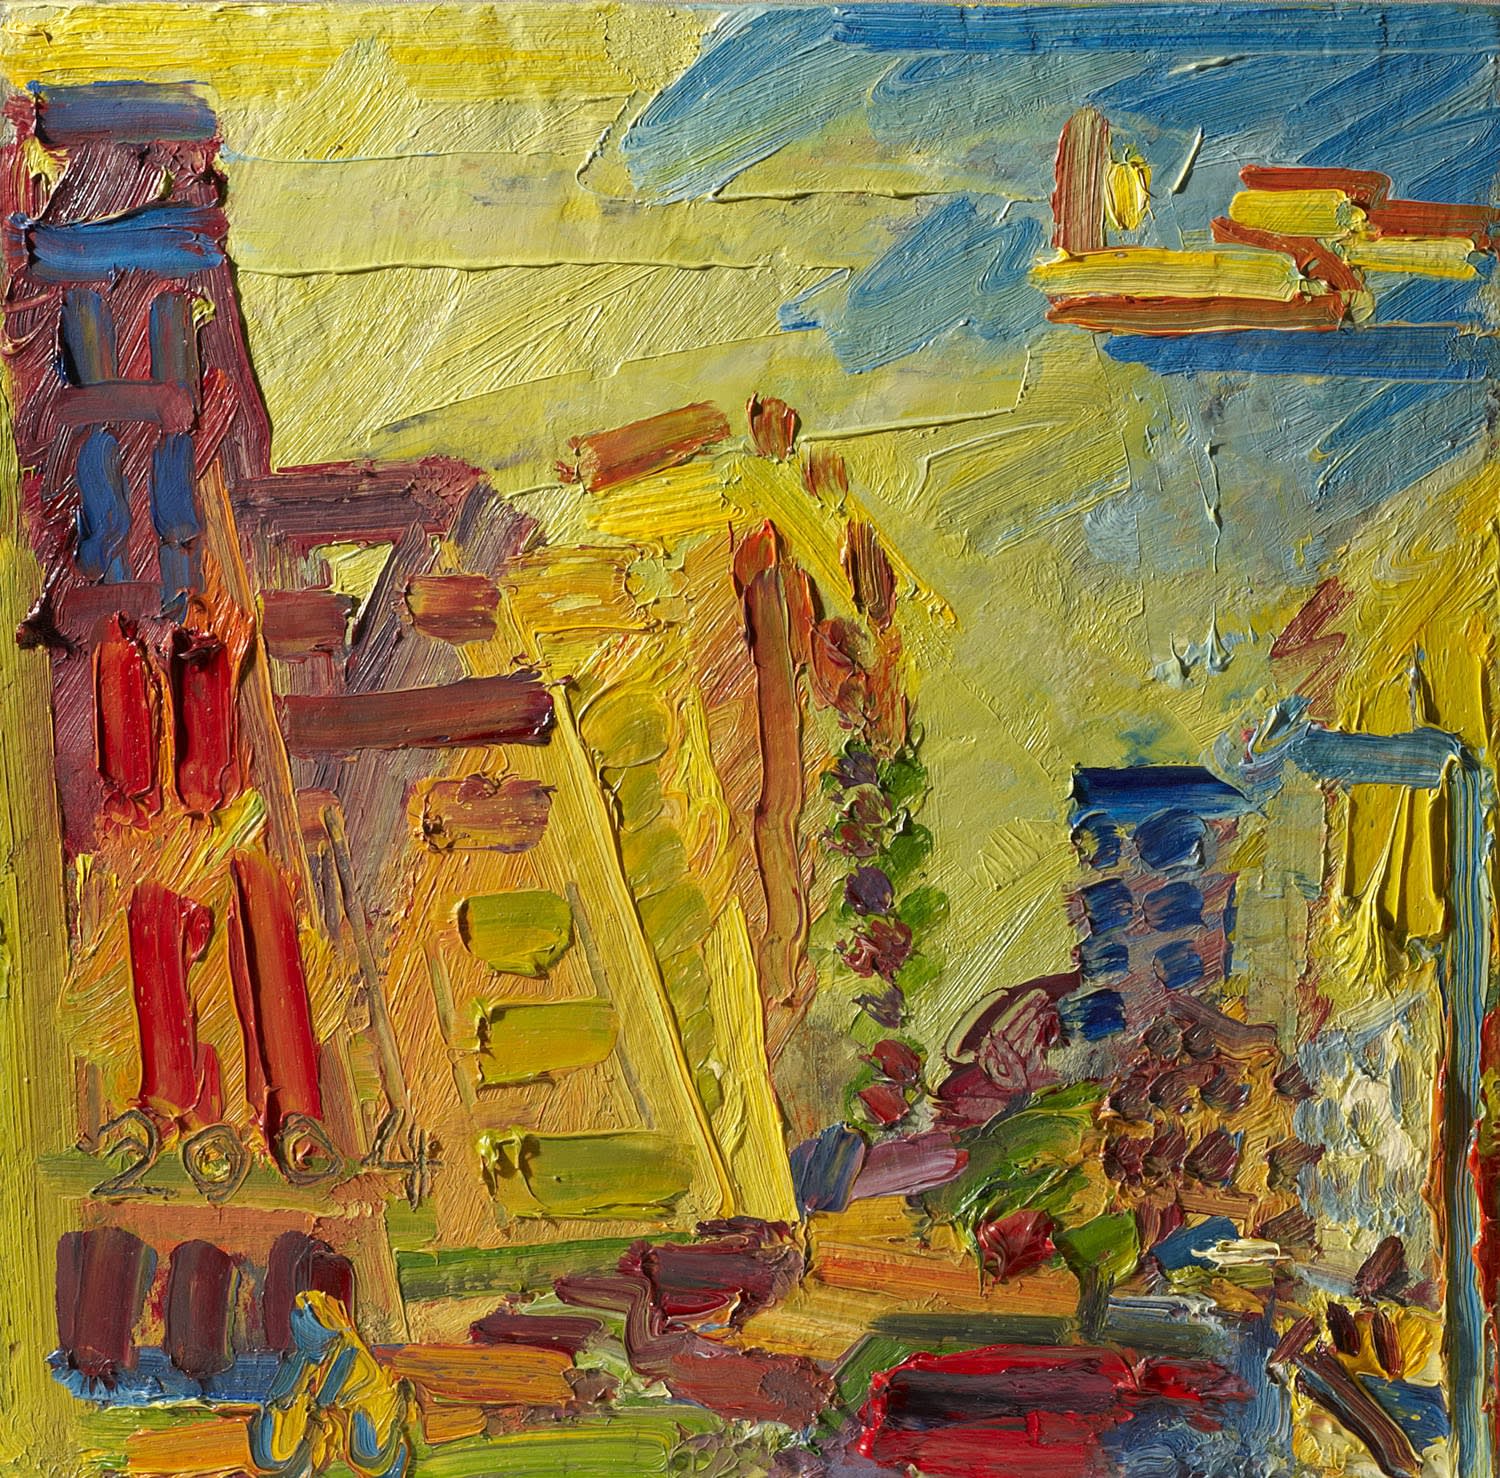 Frank Auerbach (1931-) Mornington Crescent, Summer Morning II 2004 Oil on board 51 x 51 cm Ben Uri Collection © Frank Auerbach, courtesy Marlborough Fine Art To see and discover more about this artist click here